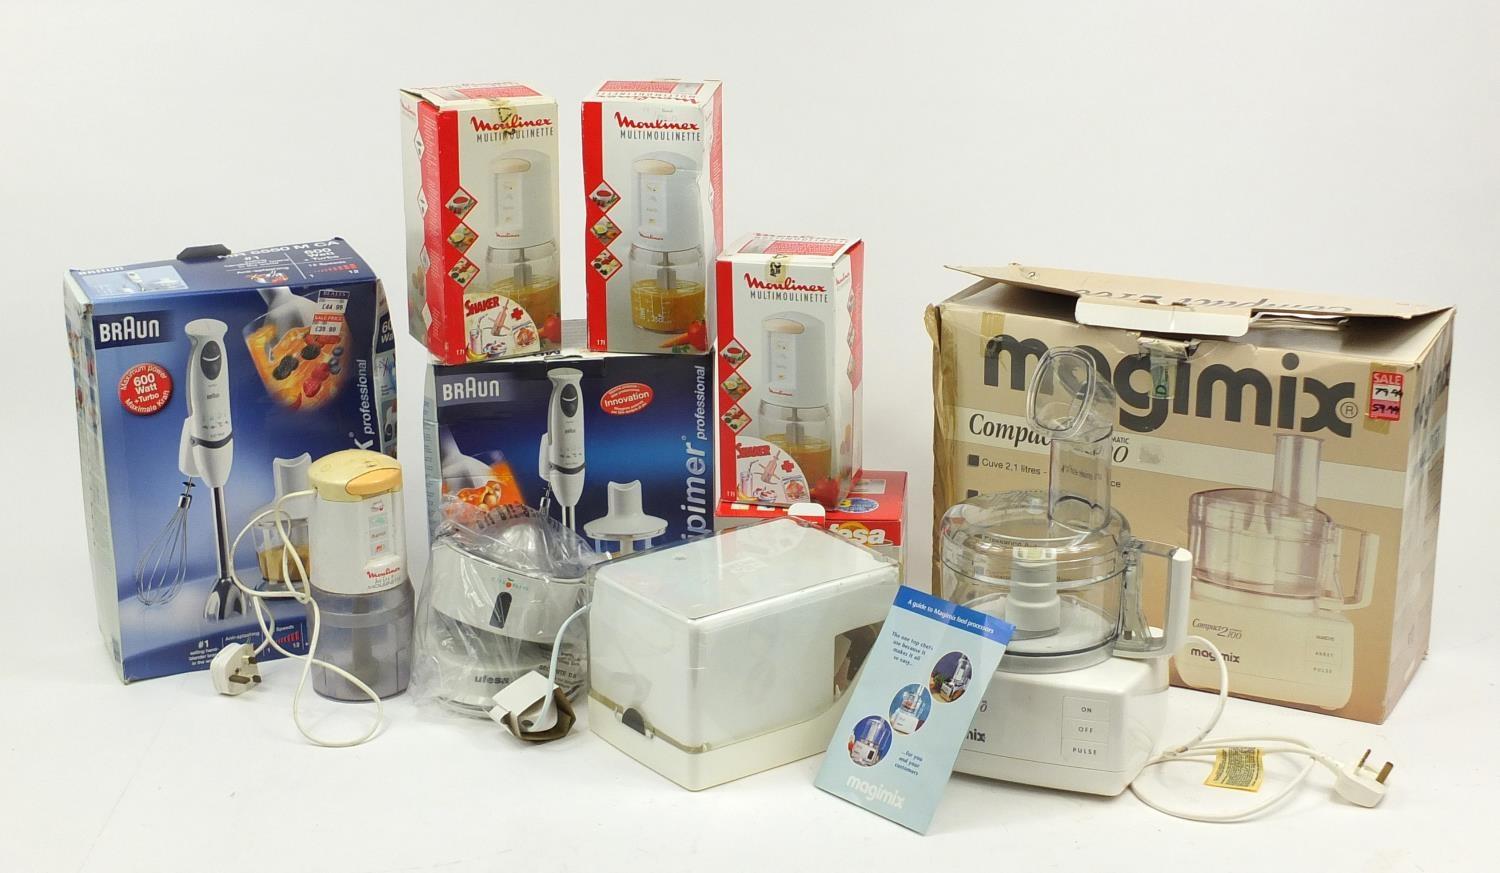 As new kitchen electricals including Magimix Compact 2100 and Braun Multiquick blender/whisk : For